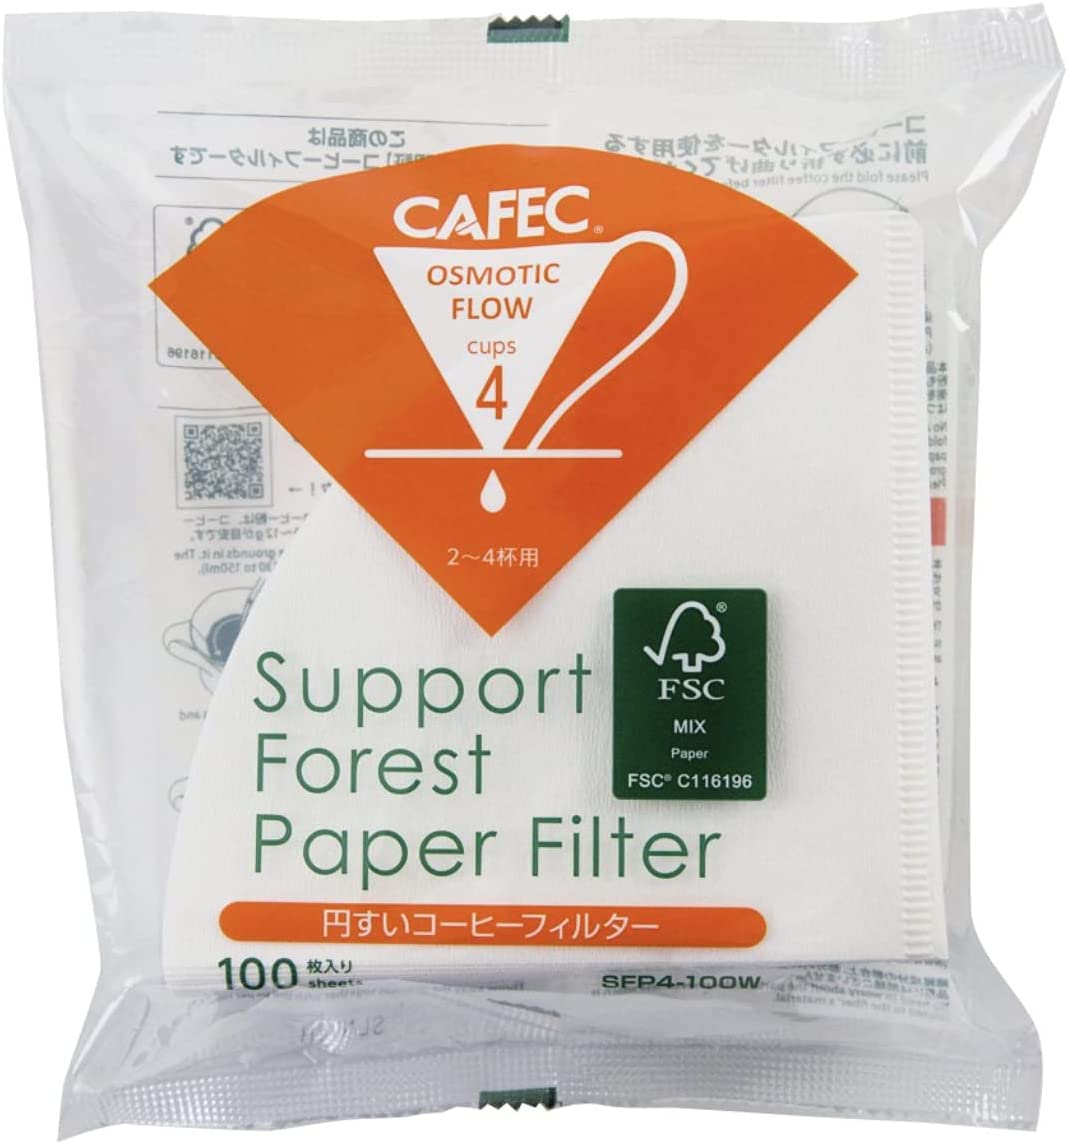 CAFEC SFP (Support Forest Paper) Filter Paper | Made in Japan | 100 Sheets - kafeido roasters